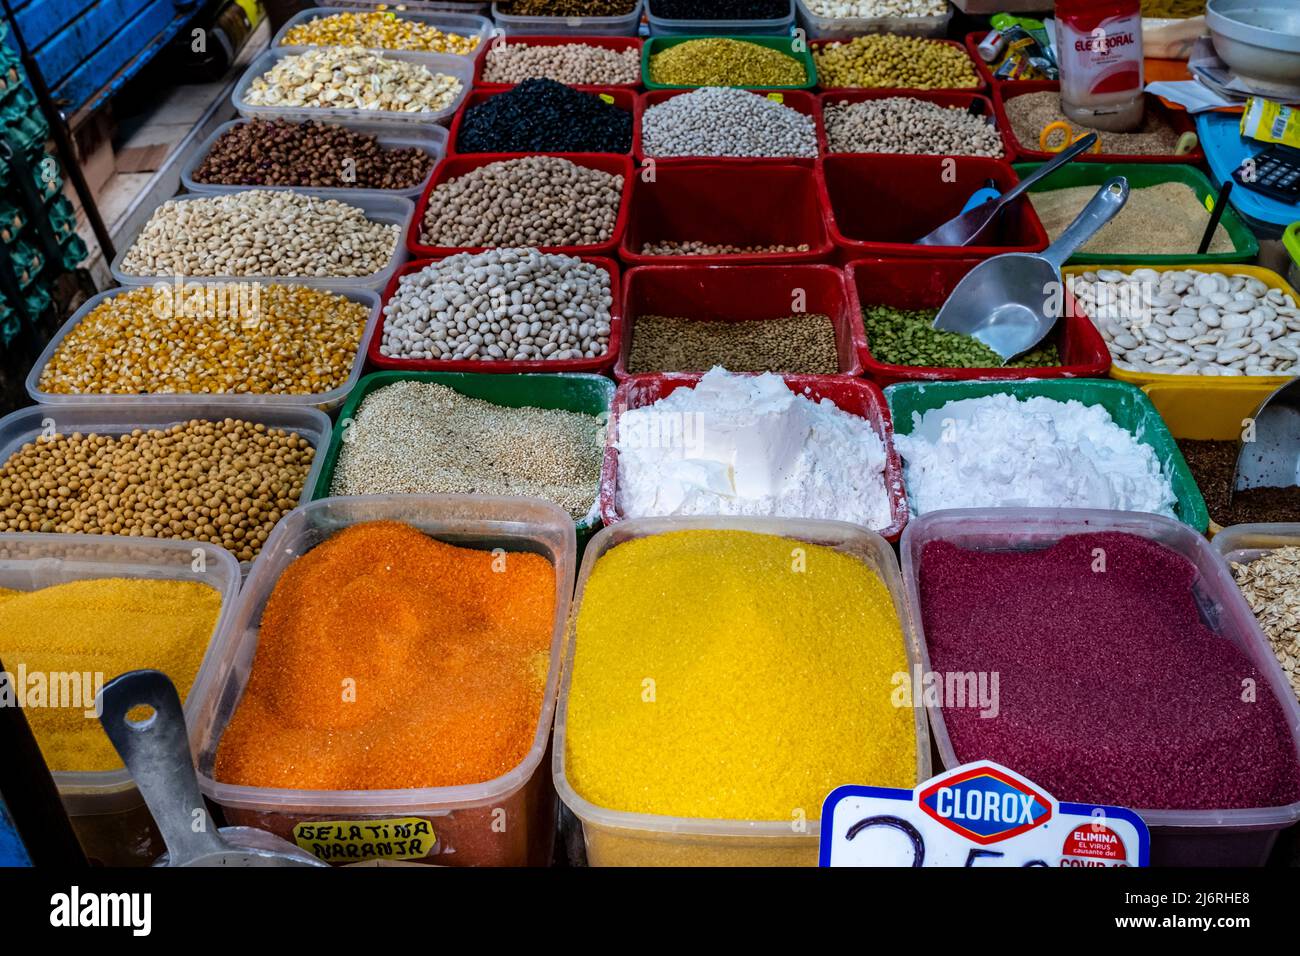 Beans and Pulses (Legumes) For Sale At The Mercado Modelo, Chiclayo, Lambayeque Region, Peru. Stock Photo